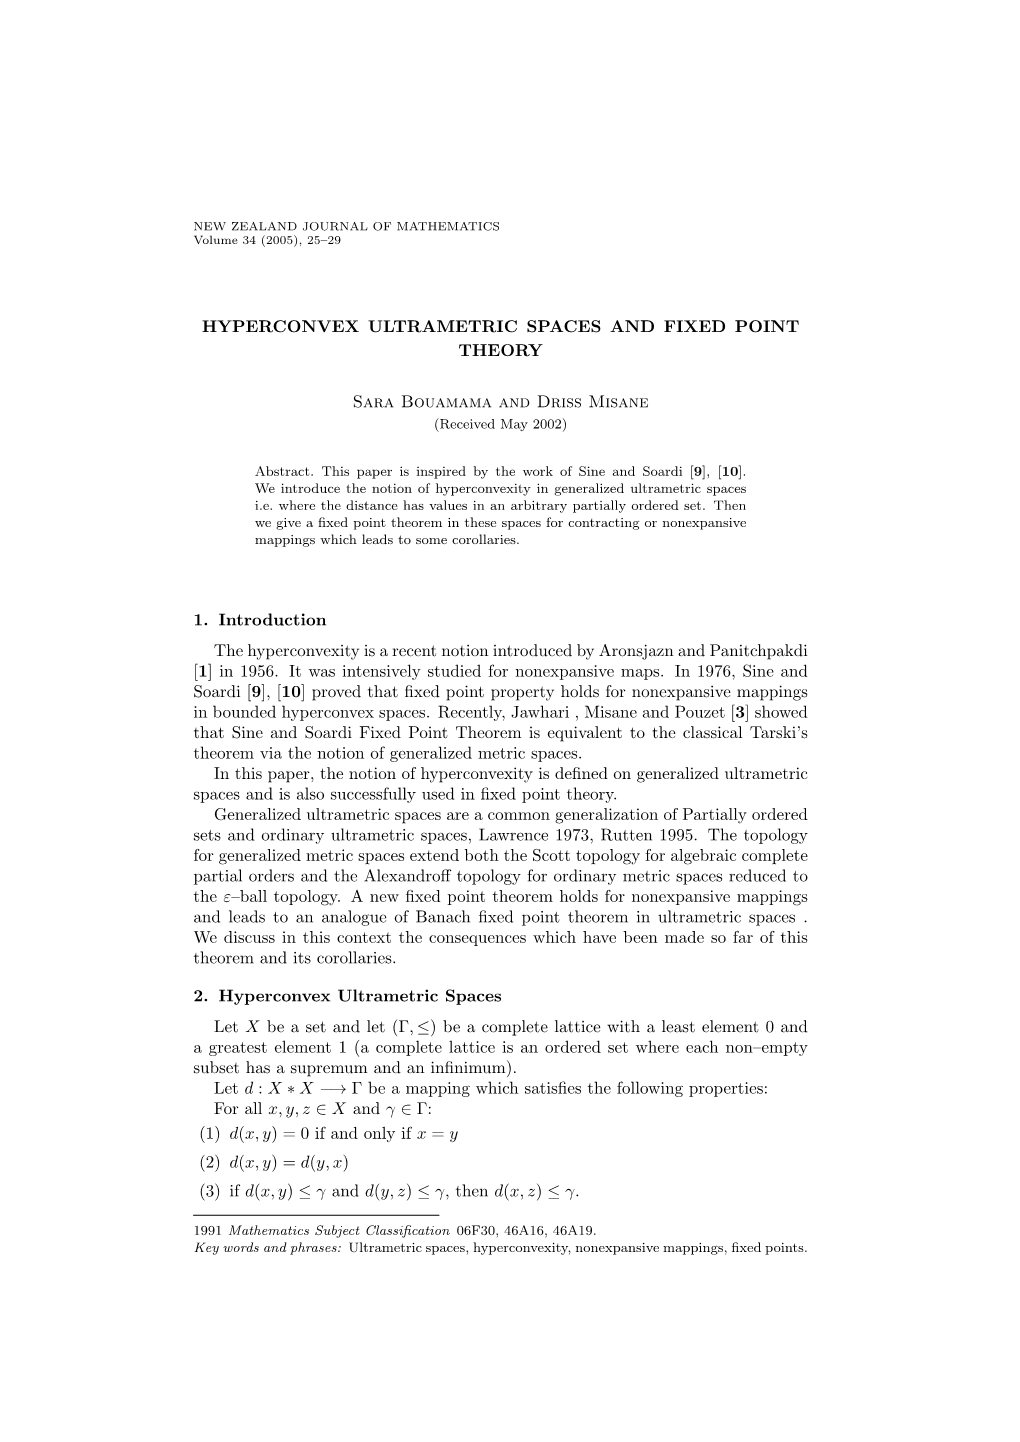 Hyperconvex Ultrametric Spaces and Fixed Point Theory